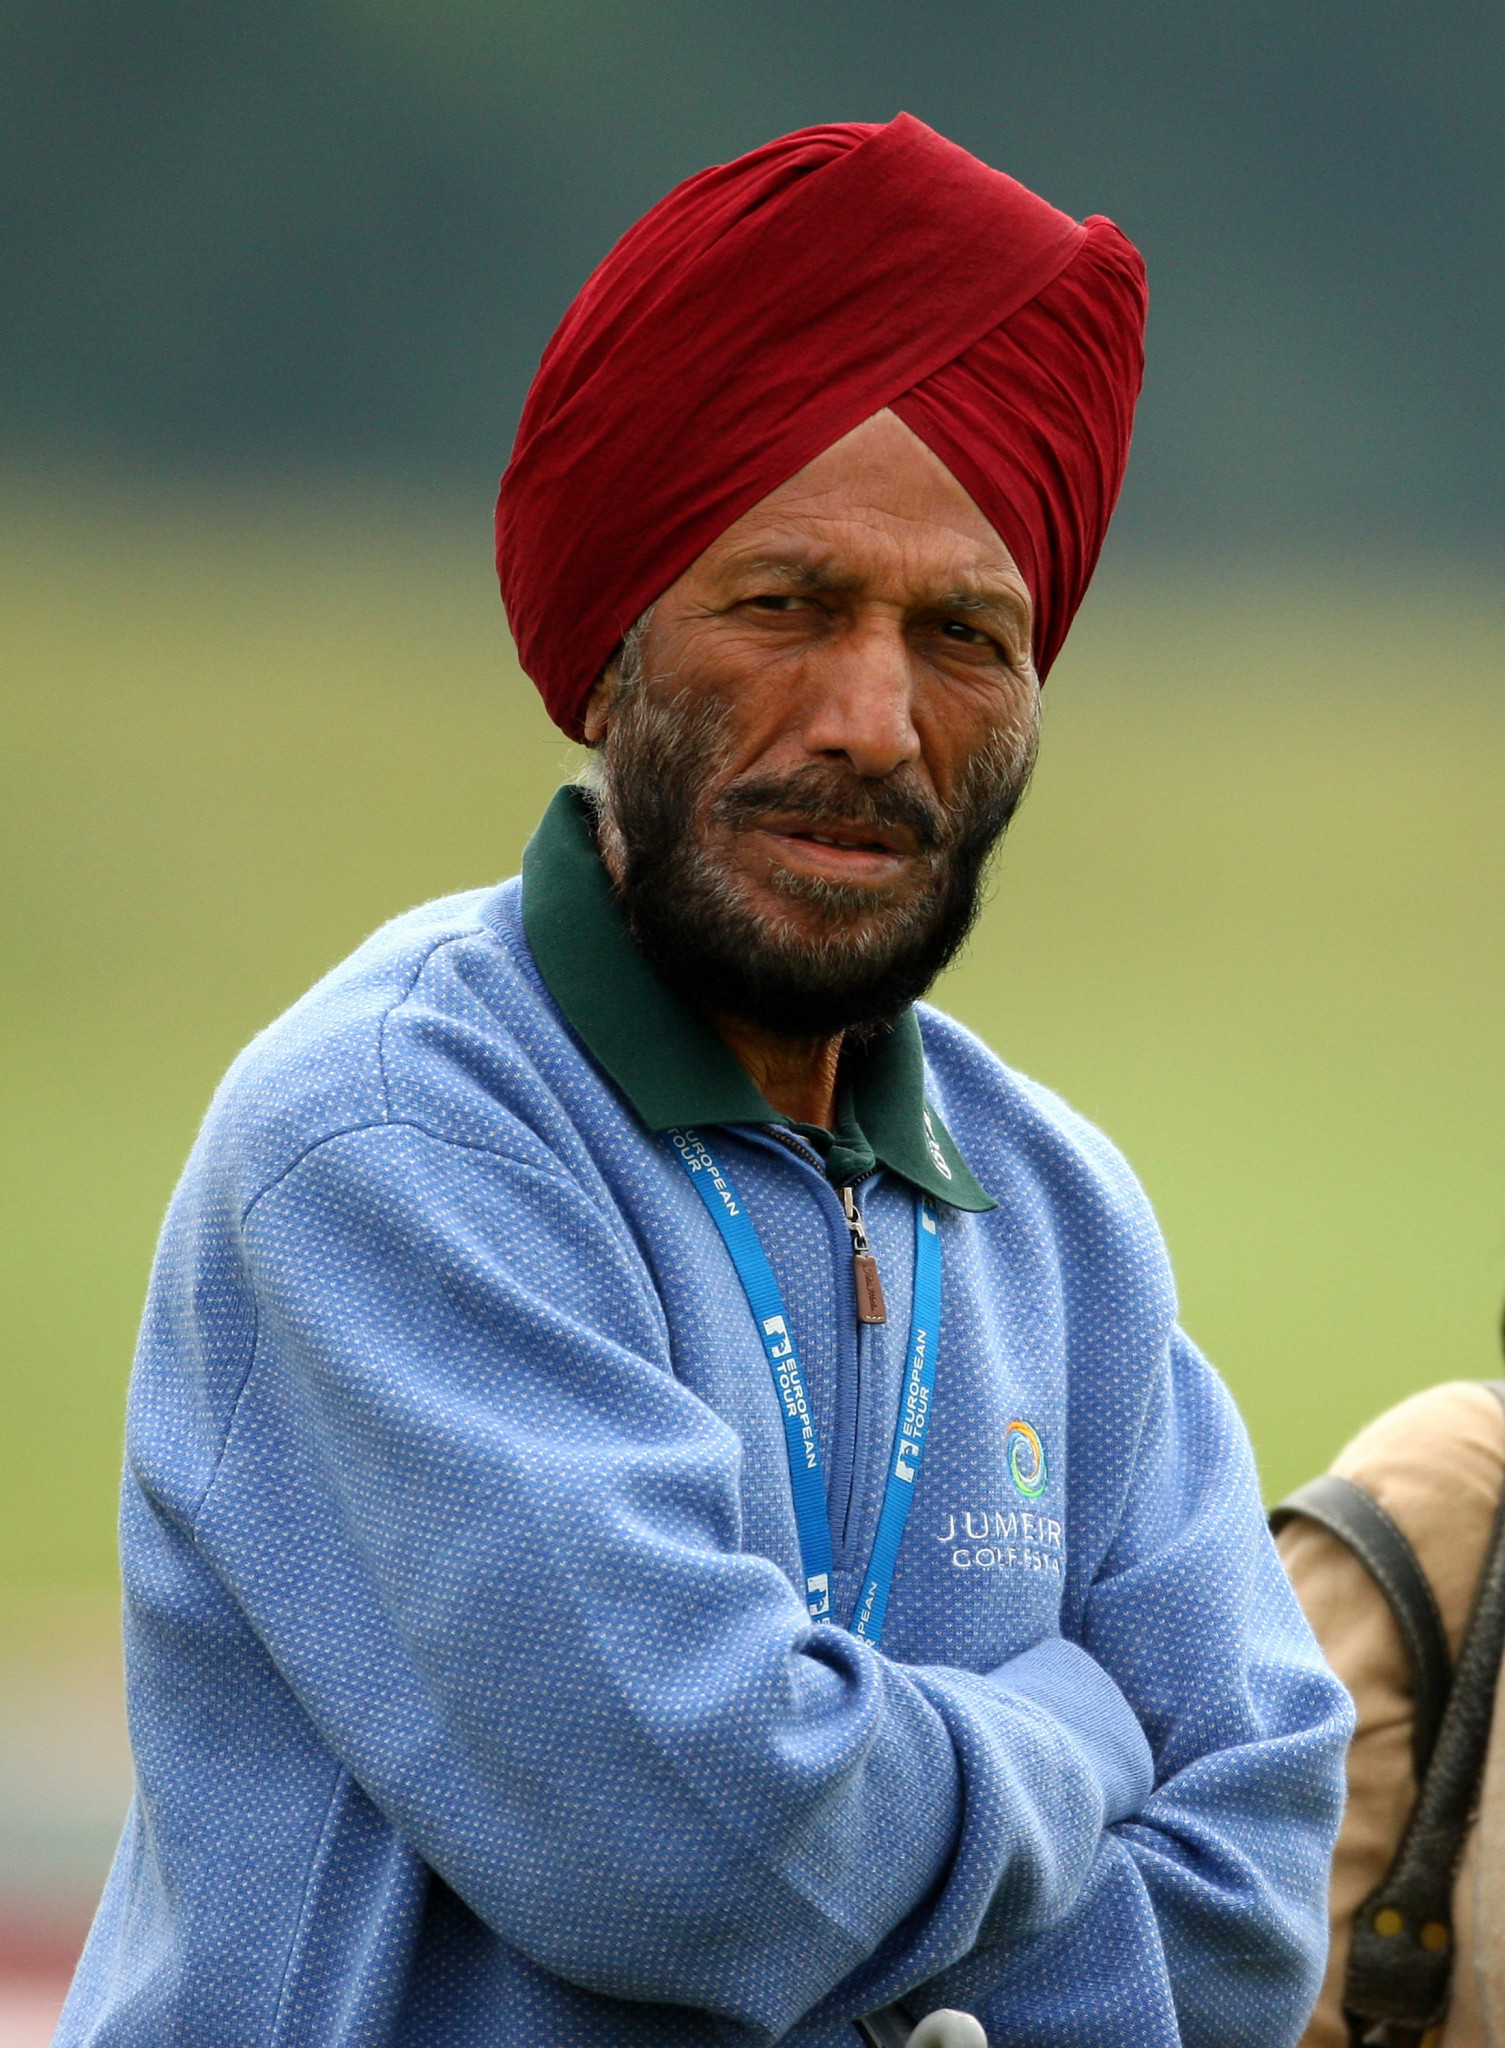 Milkha Singh is hoping to see an athletics Olympic gold medal for India in his lifetime ©Getty Images